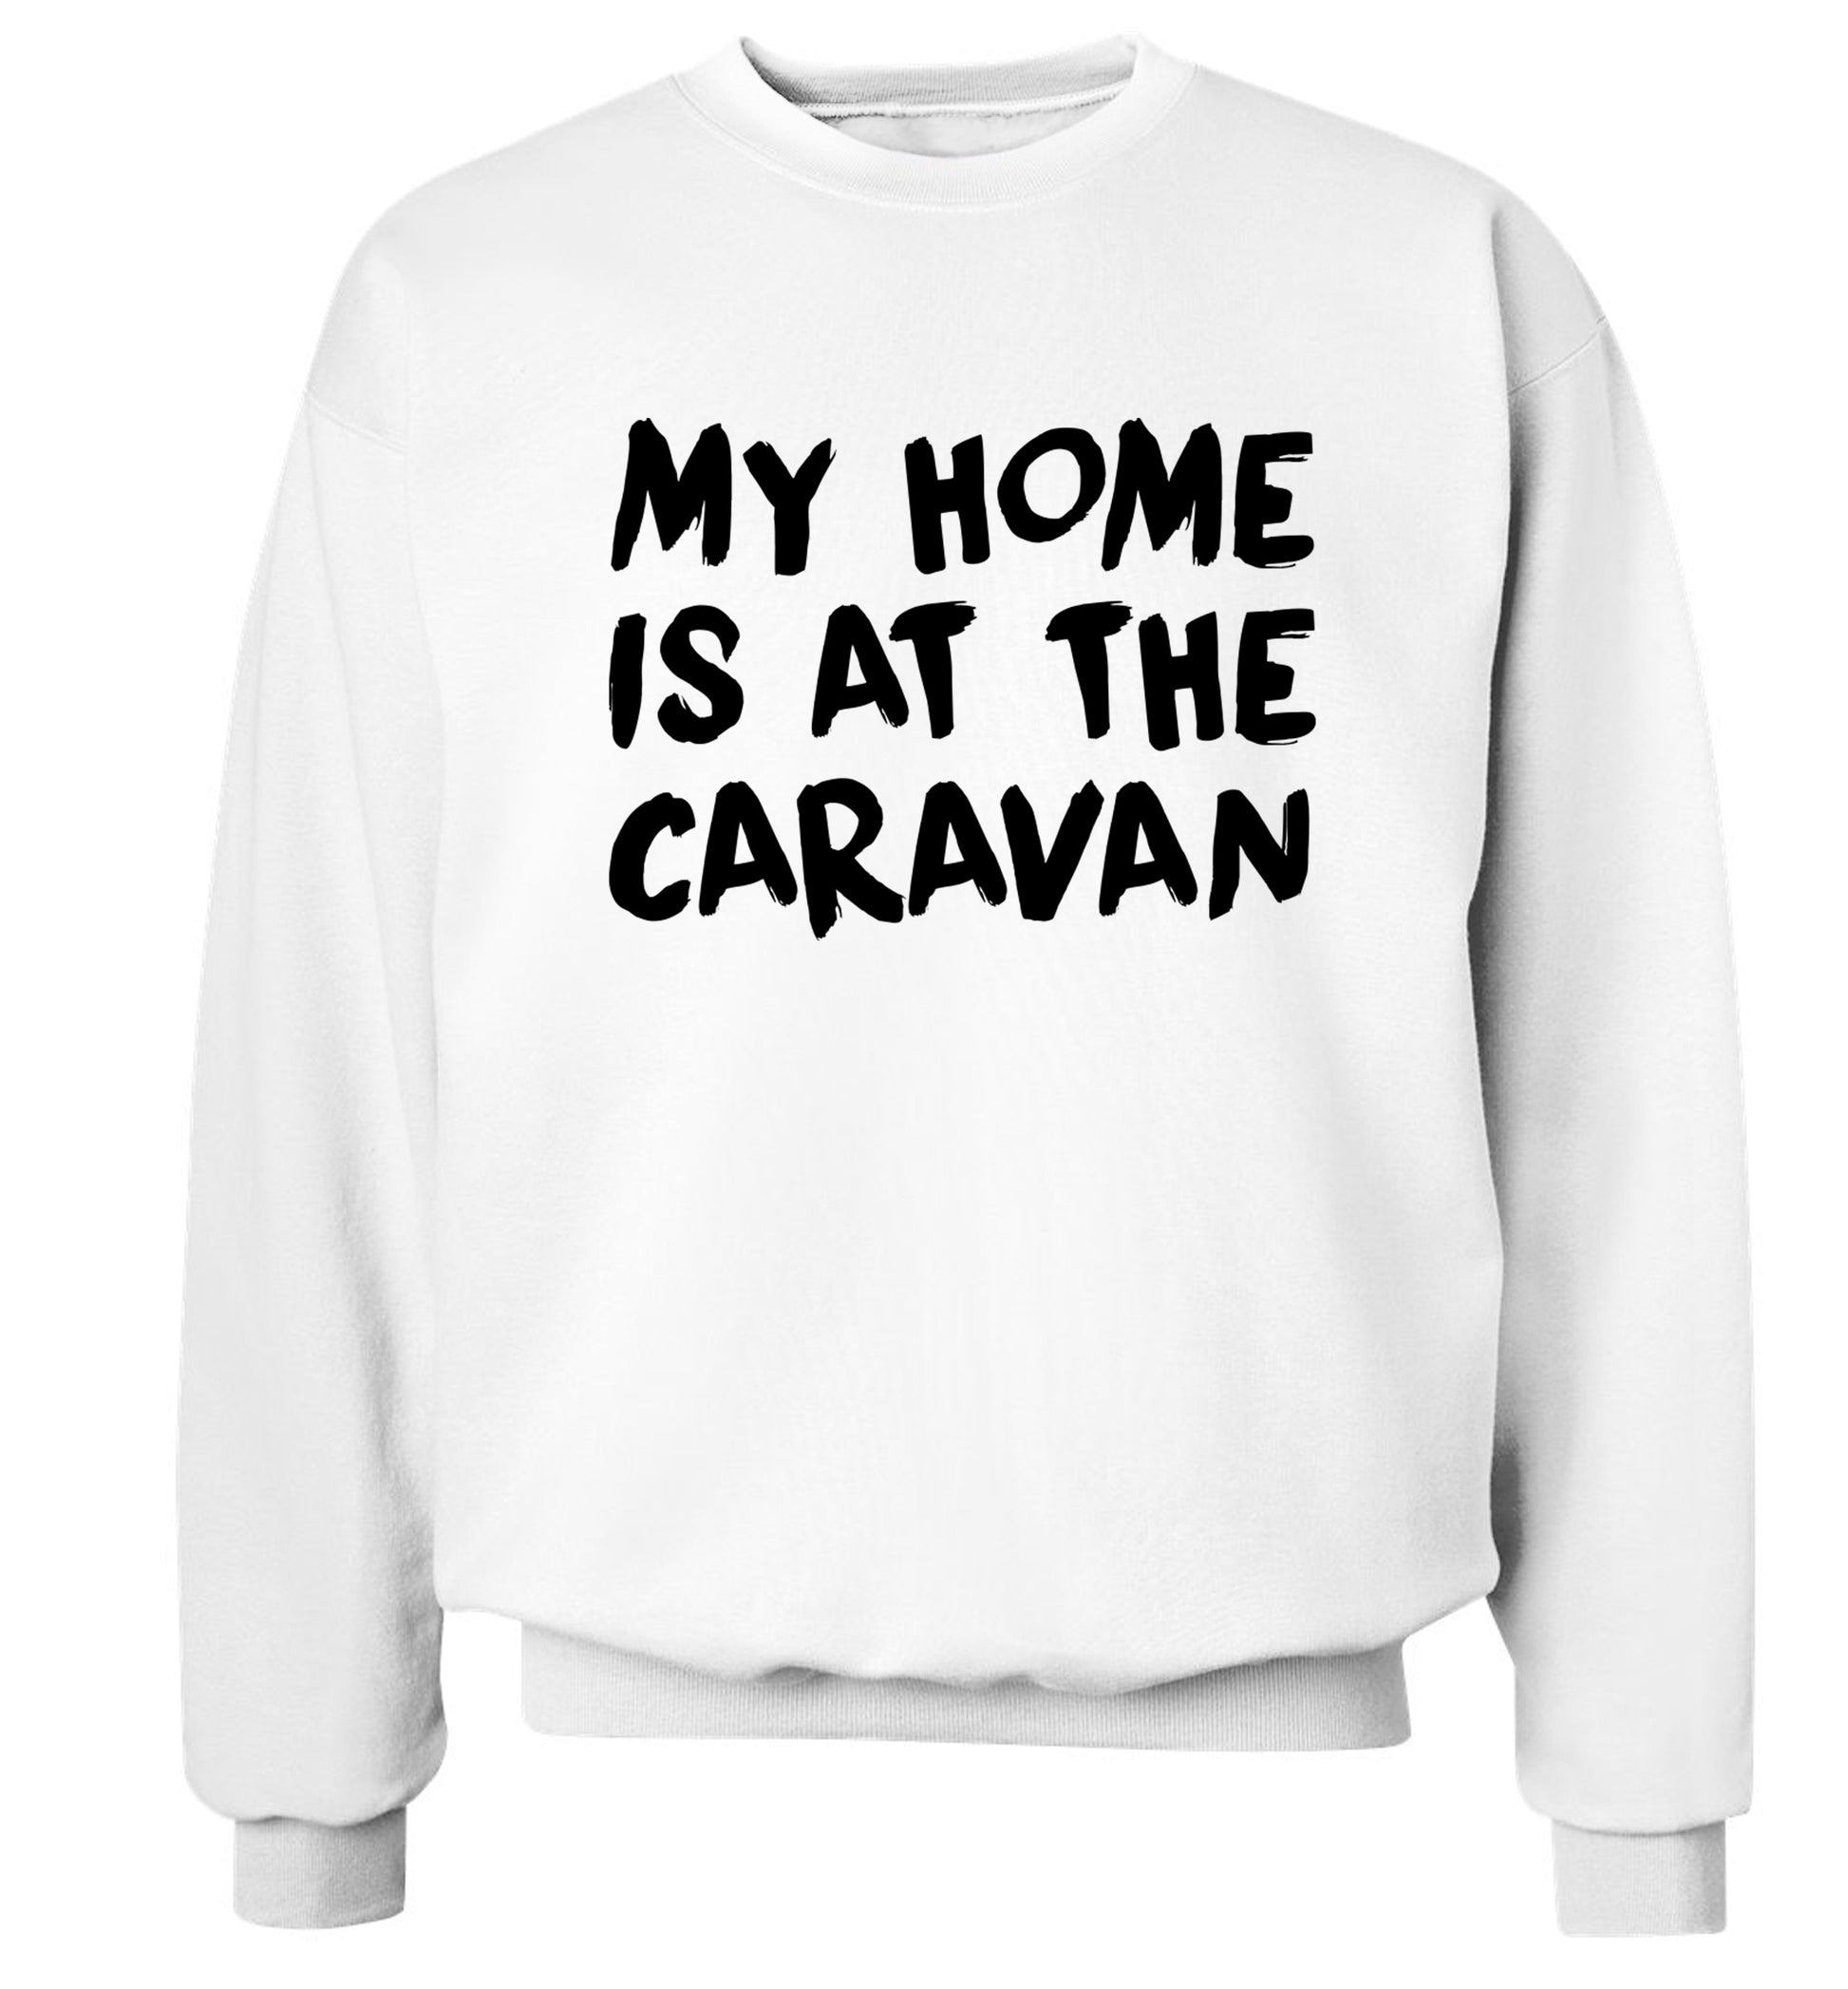 My home is at the caravan Adult's unisex white Sweater 2XL